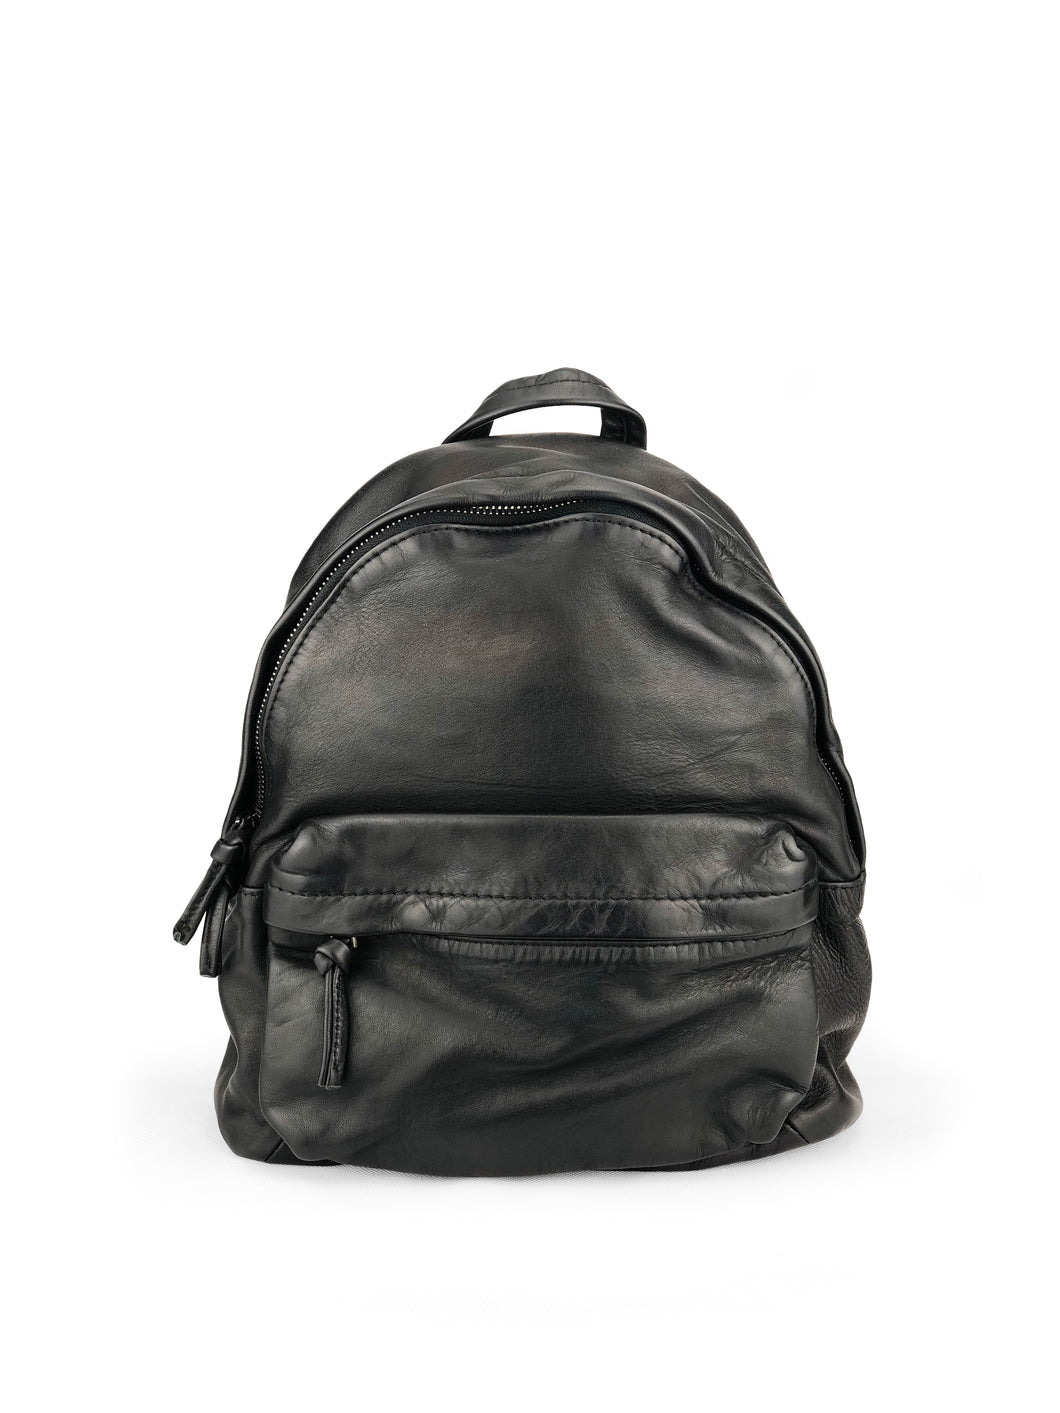 Must-Have Leather Backpack - Black